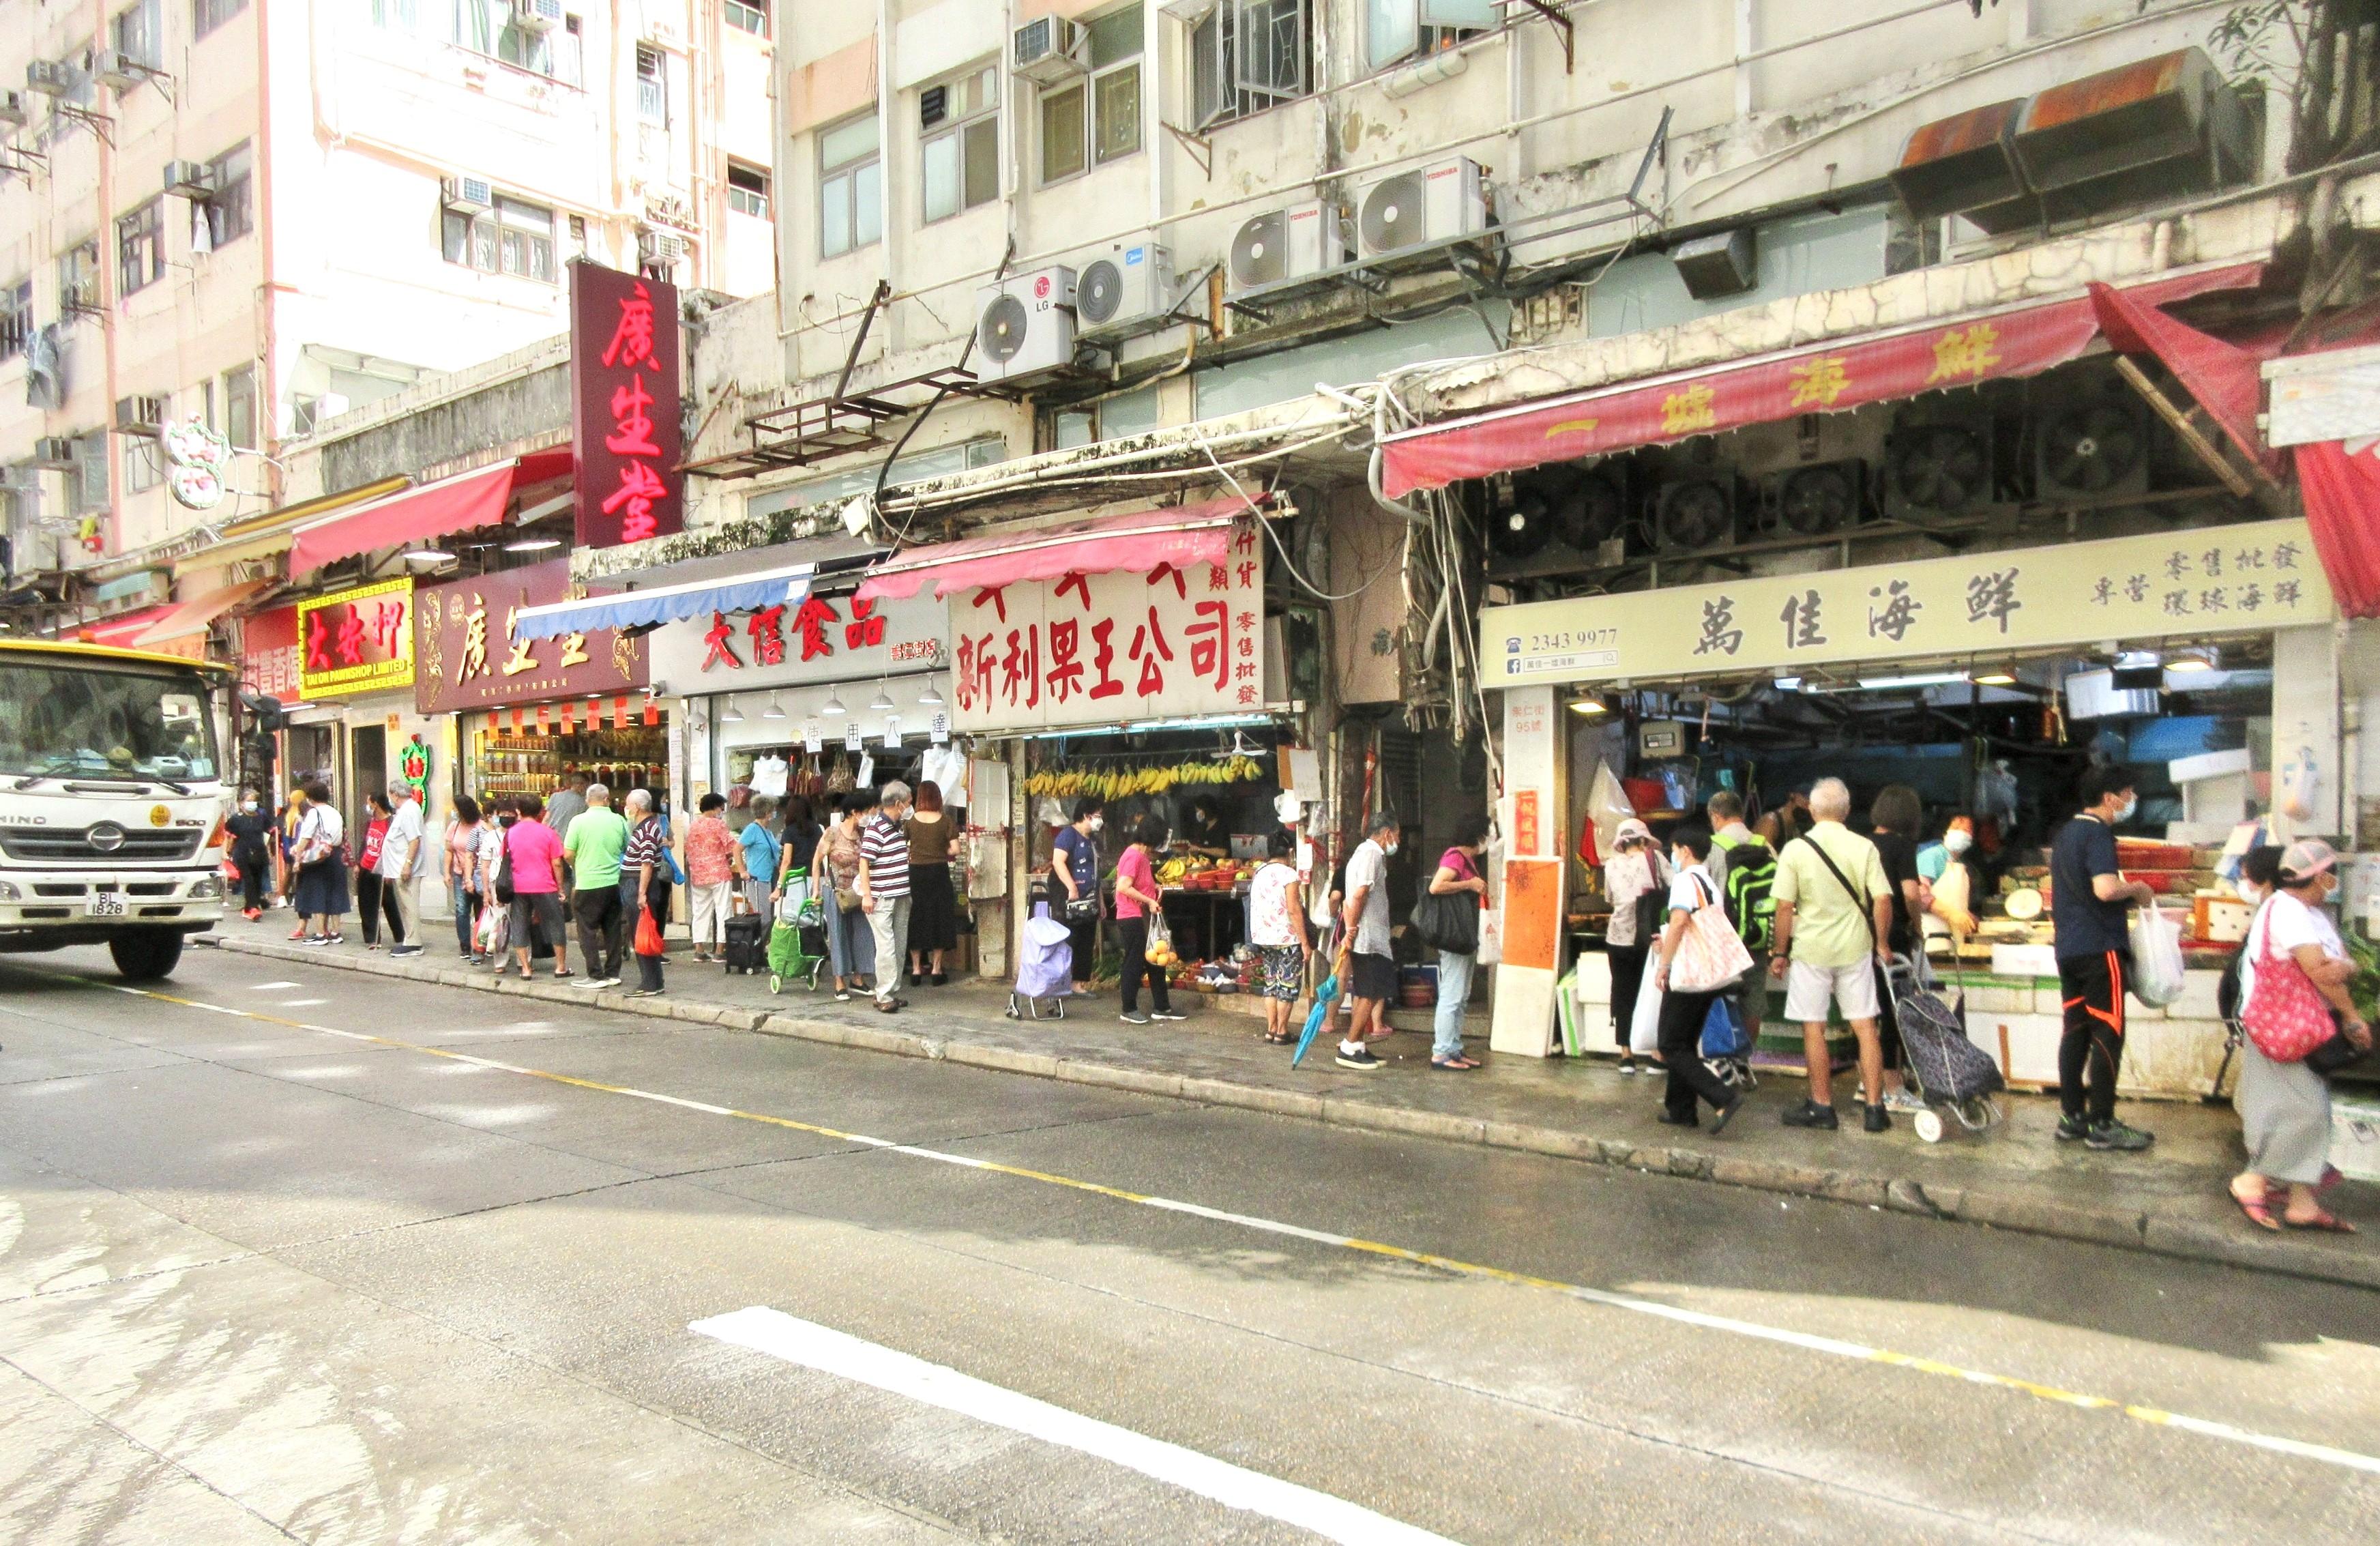 The Food and Environmental Hygiene Department (FEHD) and the Hong Kong Police Force have started a series of stringent enforcement actions against illegal shop front extension activities in various districts since October 3. Photo shows the condition of a street in Kwun Tong after a joint operation yesterday (October 7).